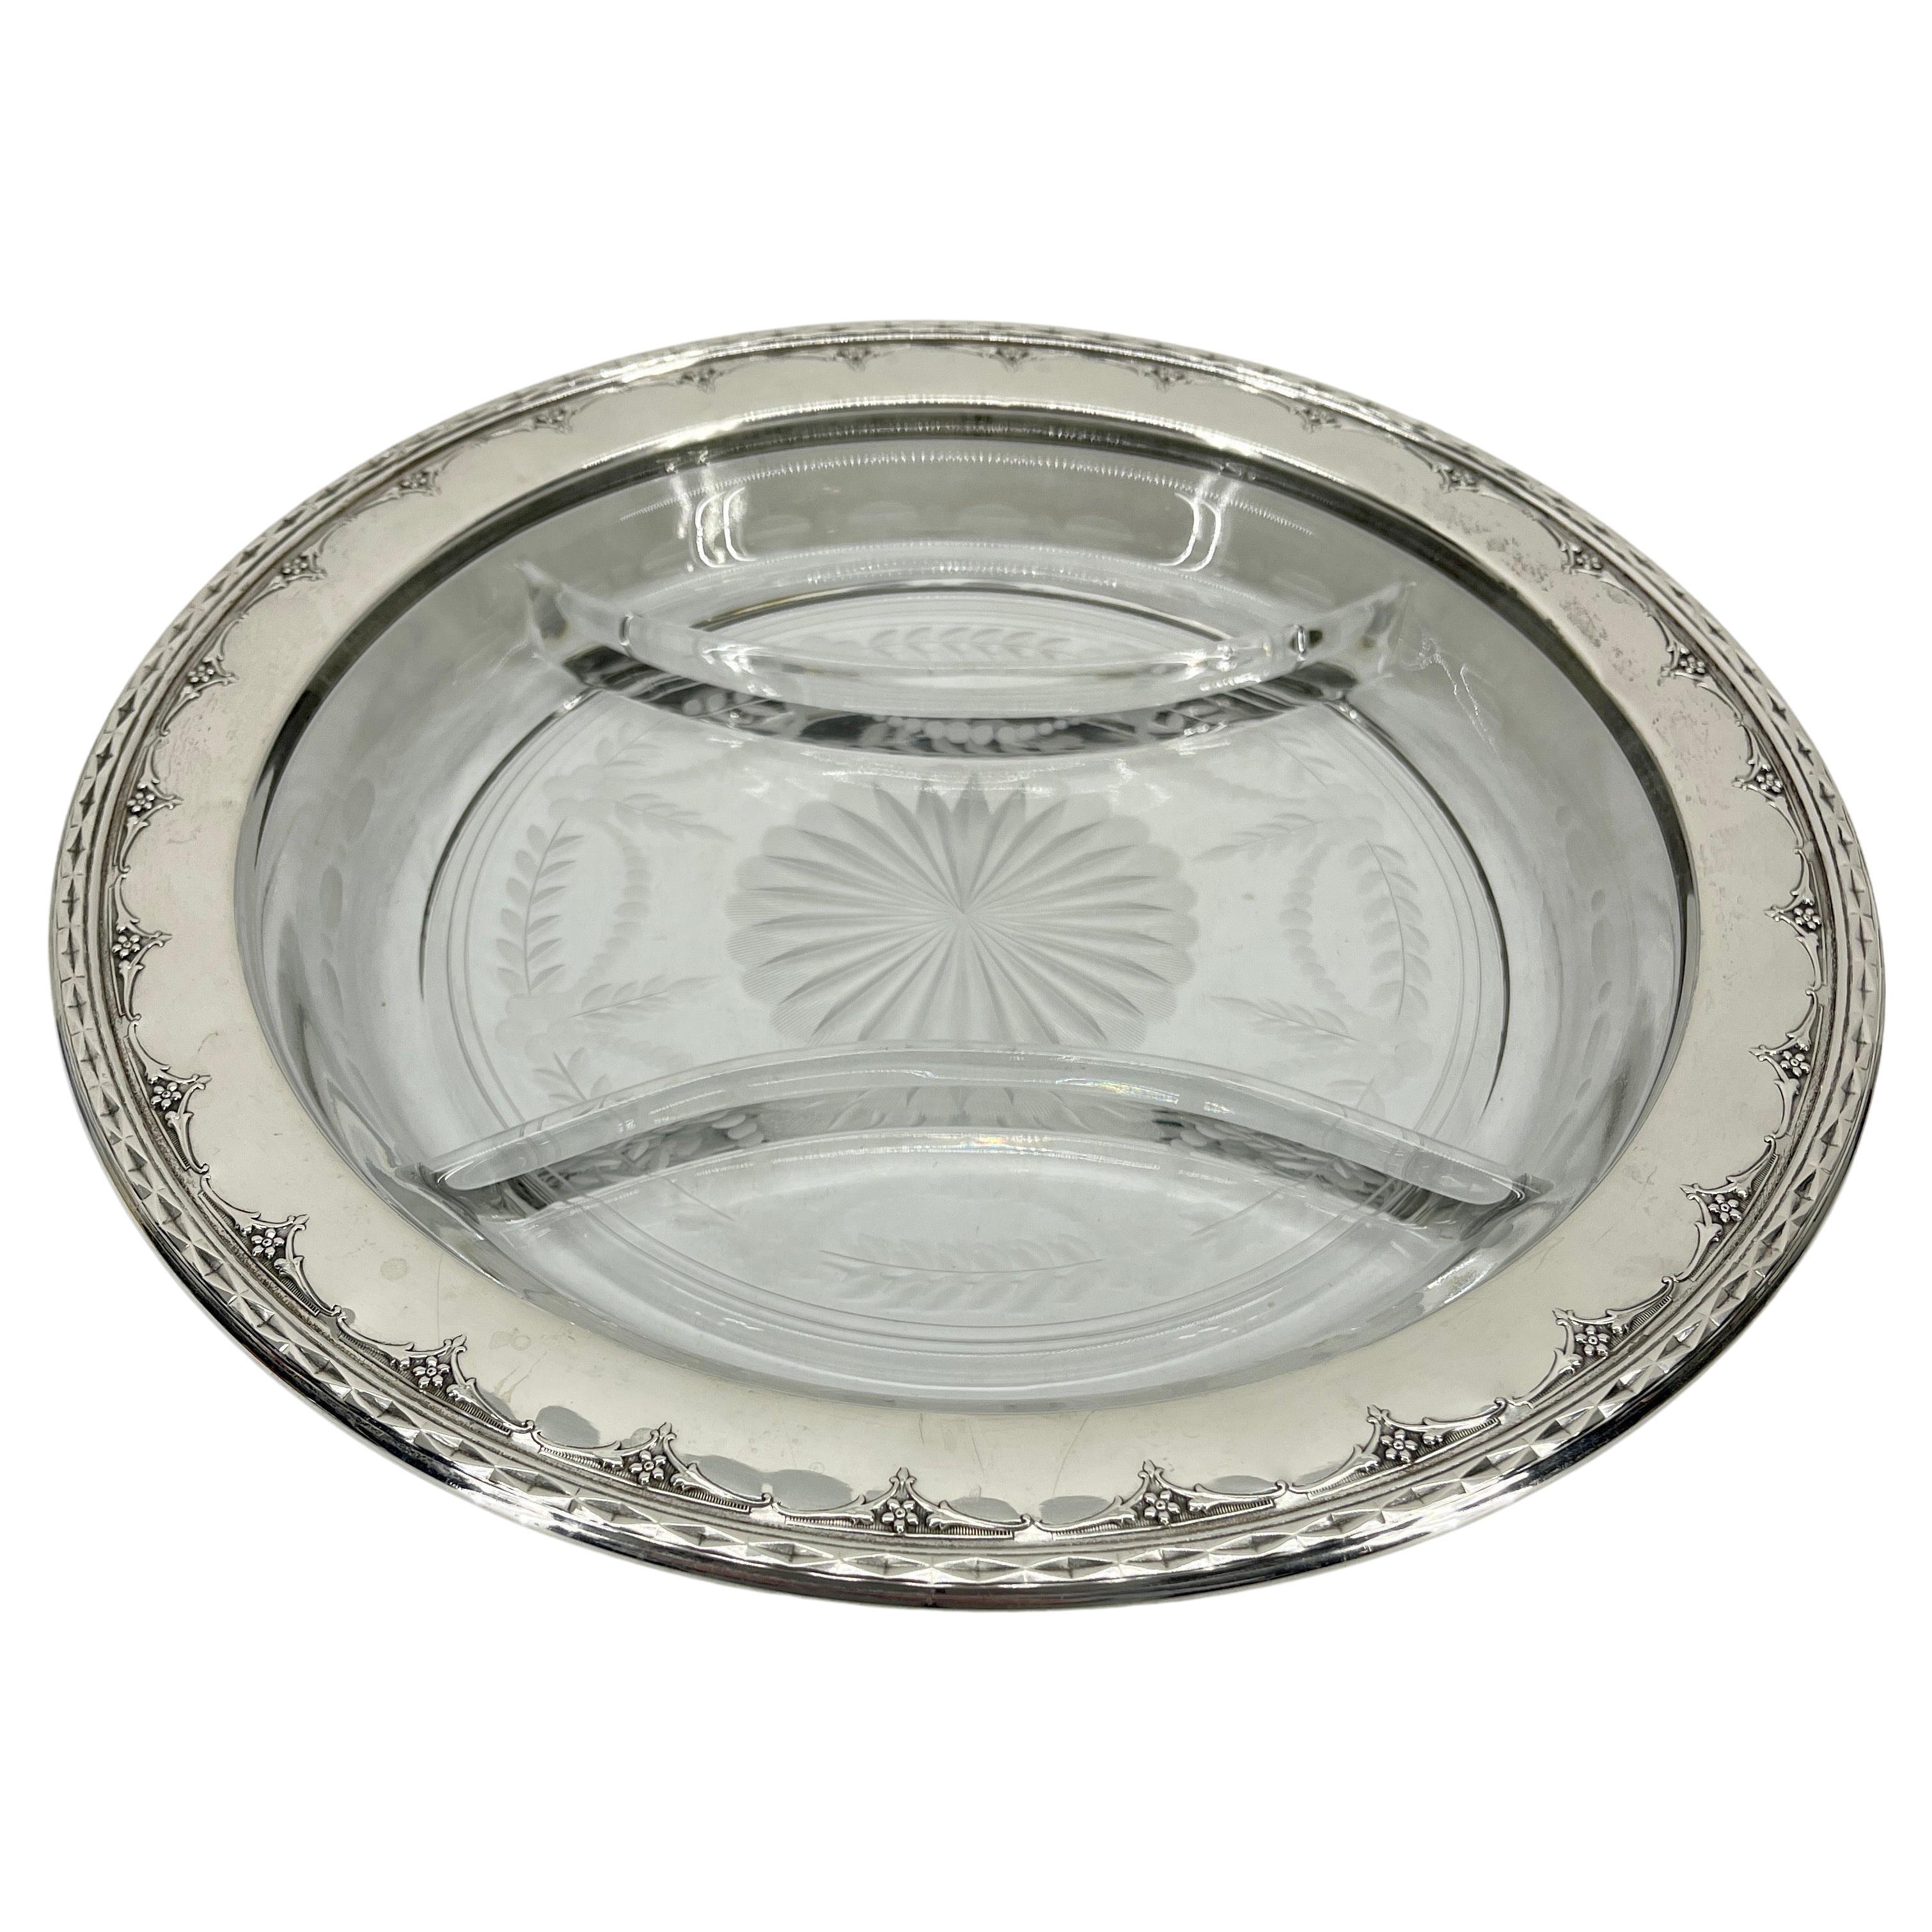 Antique Neoclassical Sterling Silver and Cut Glass Crudité and Condiments Dish.
This round and charming silver edged cut glass tray was made by Wallace Silversmiths in the early part of the 1900 hundreds. The sterling silver is marked and numbered